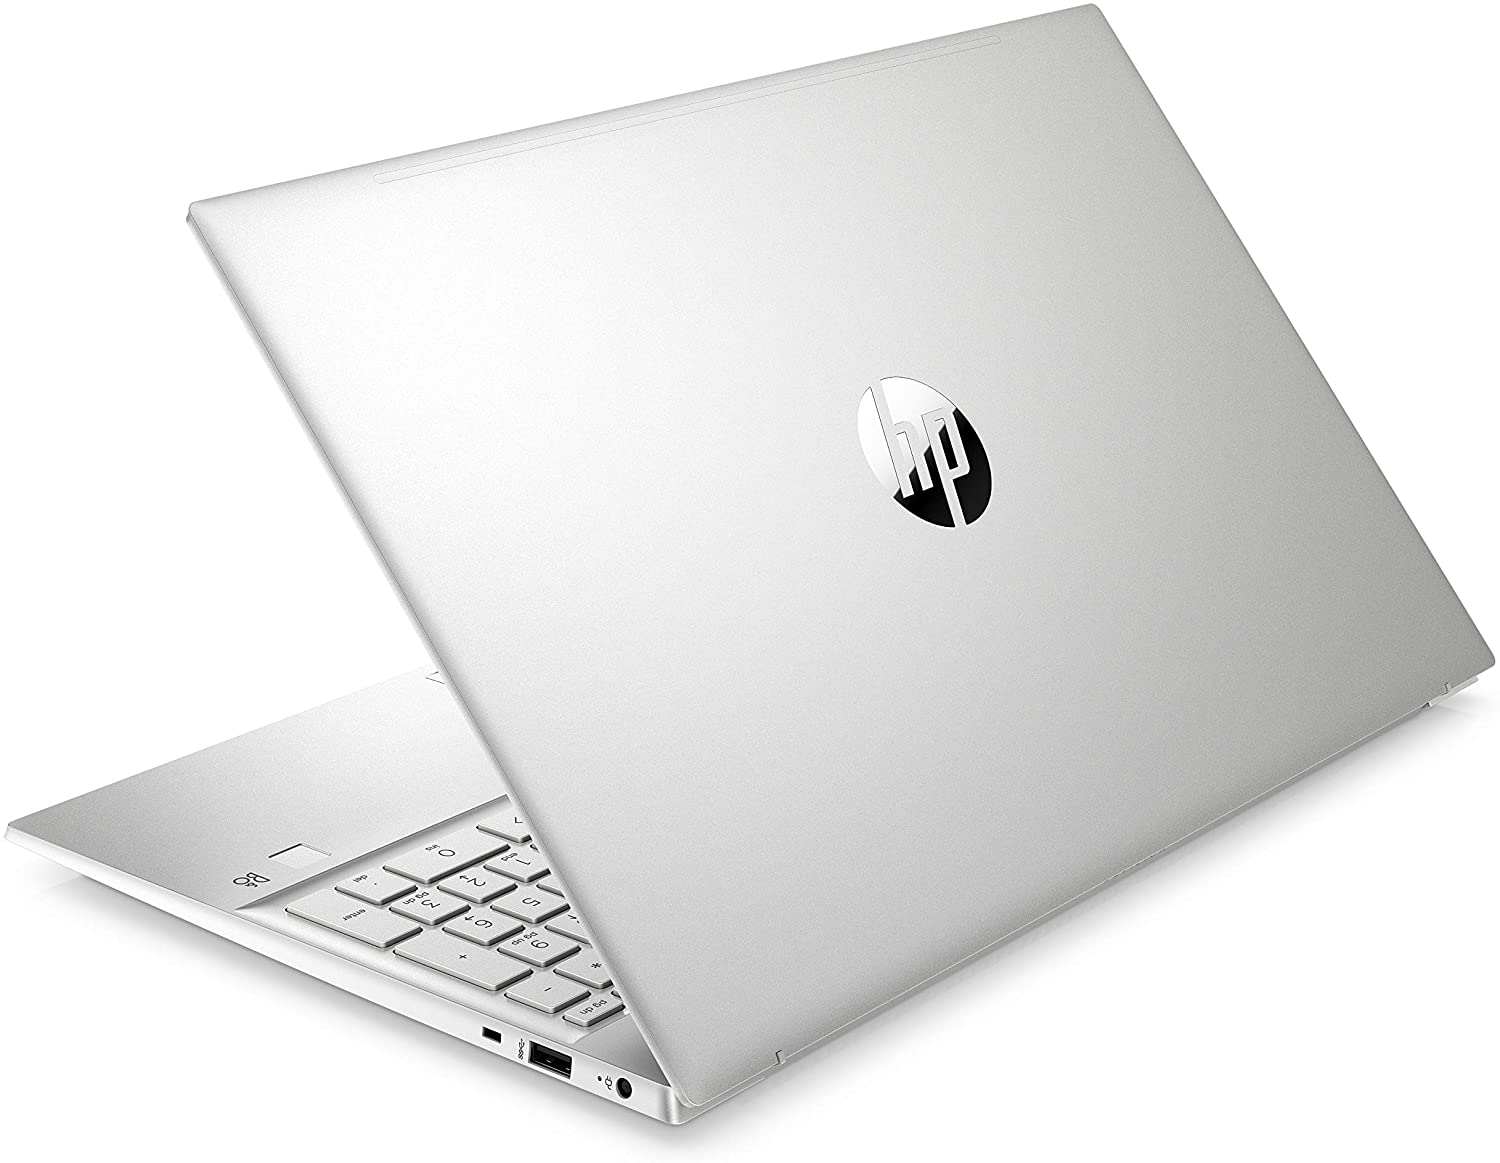 HP Pavilion 15 (15-eg0000) review - an ordinary device for 